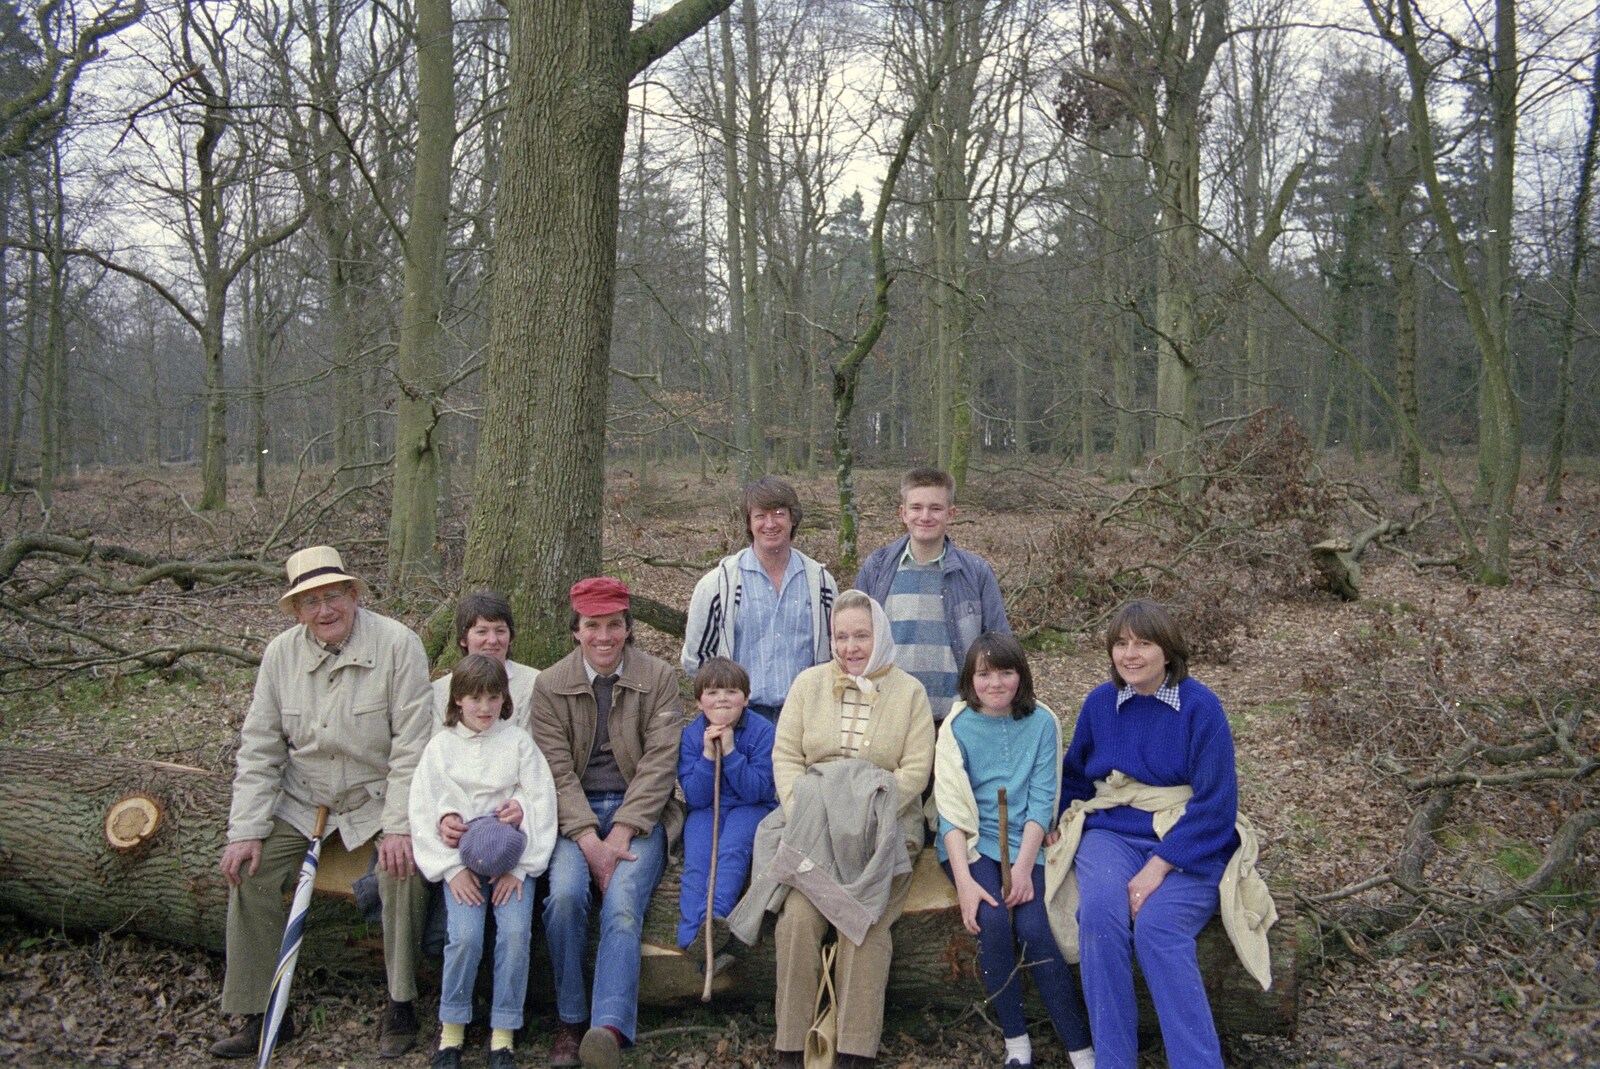 Nosher and the relatives, in the New Forest from A Walk in the New Forest, Hampshire - 27th July 1989